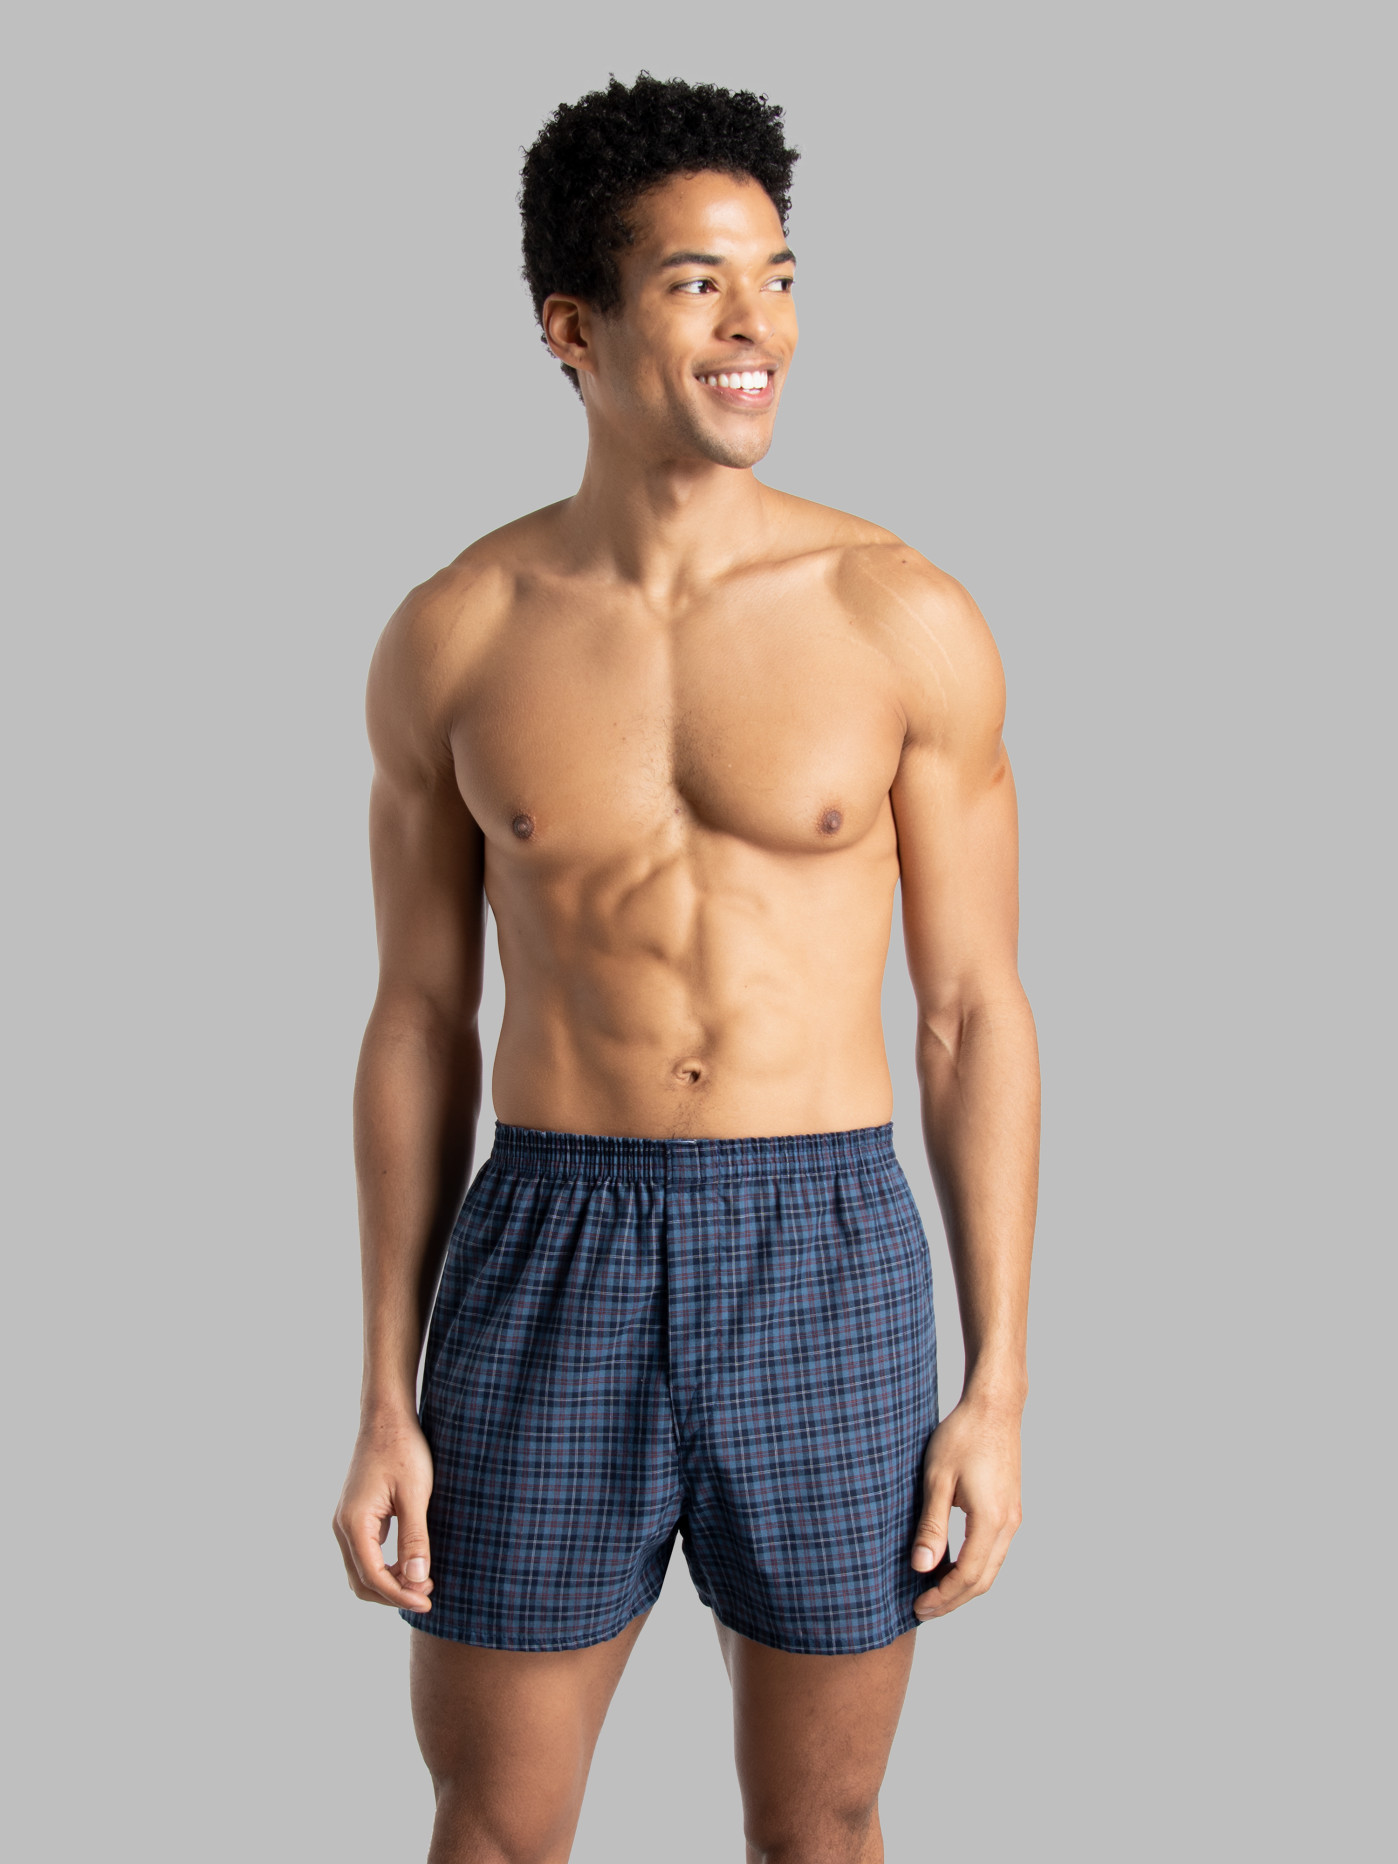 Woven Men\'s Basic Fruit Loom of Boxers Fit Boxer the |